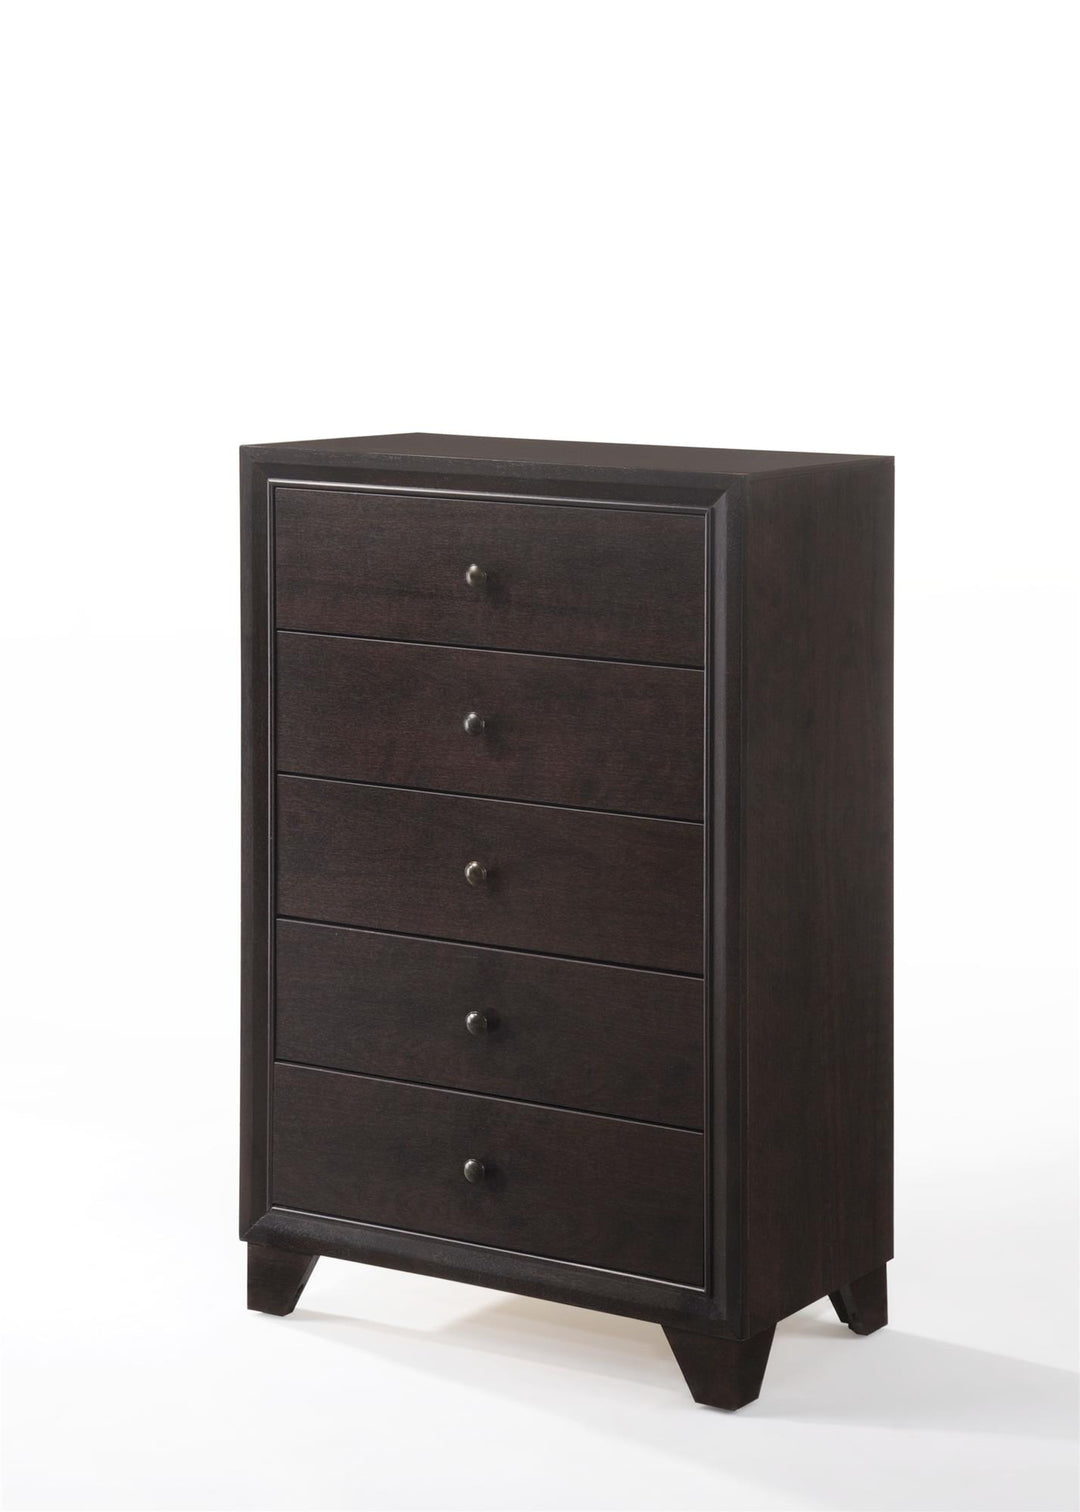 Madison furniture with five drawers -  N/A